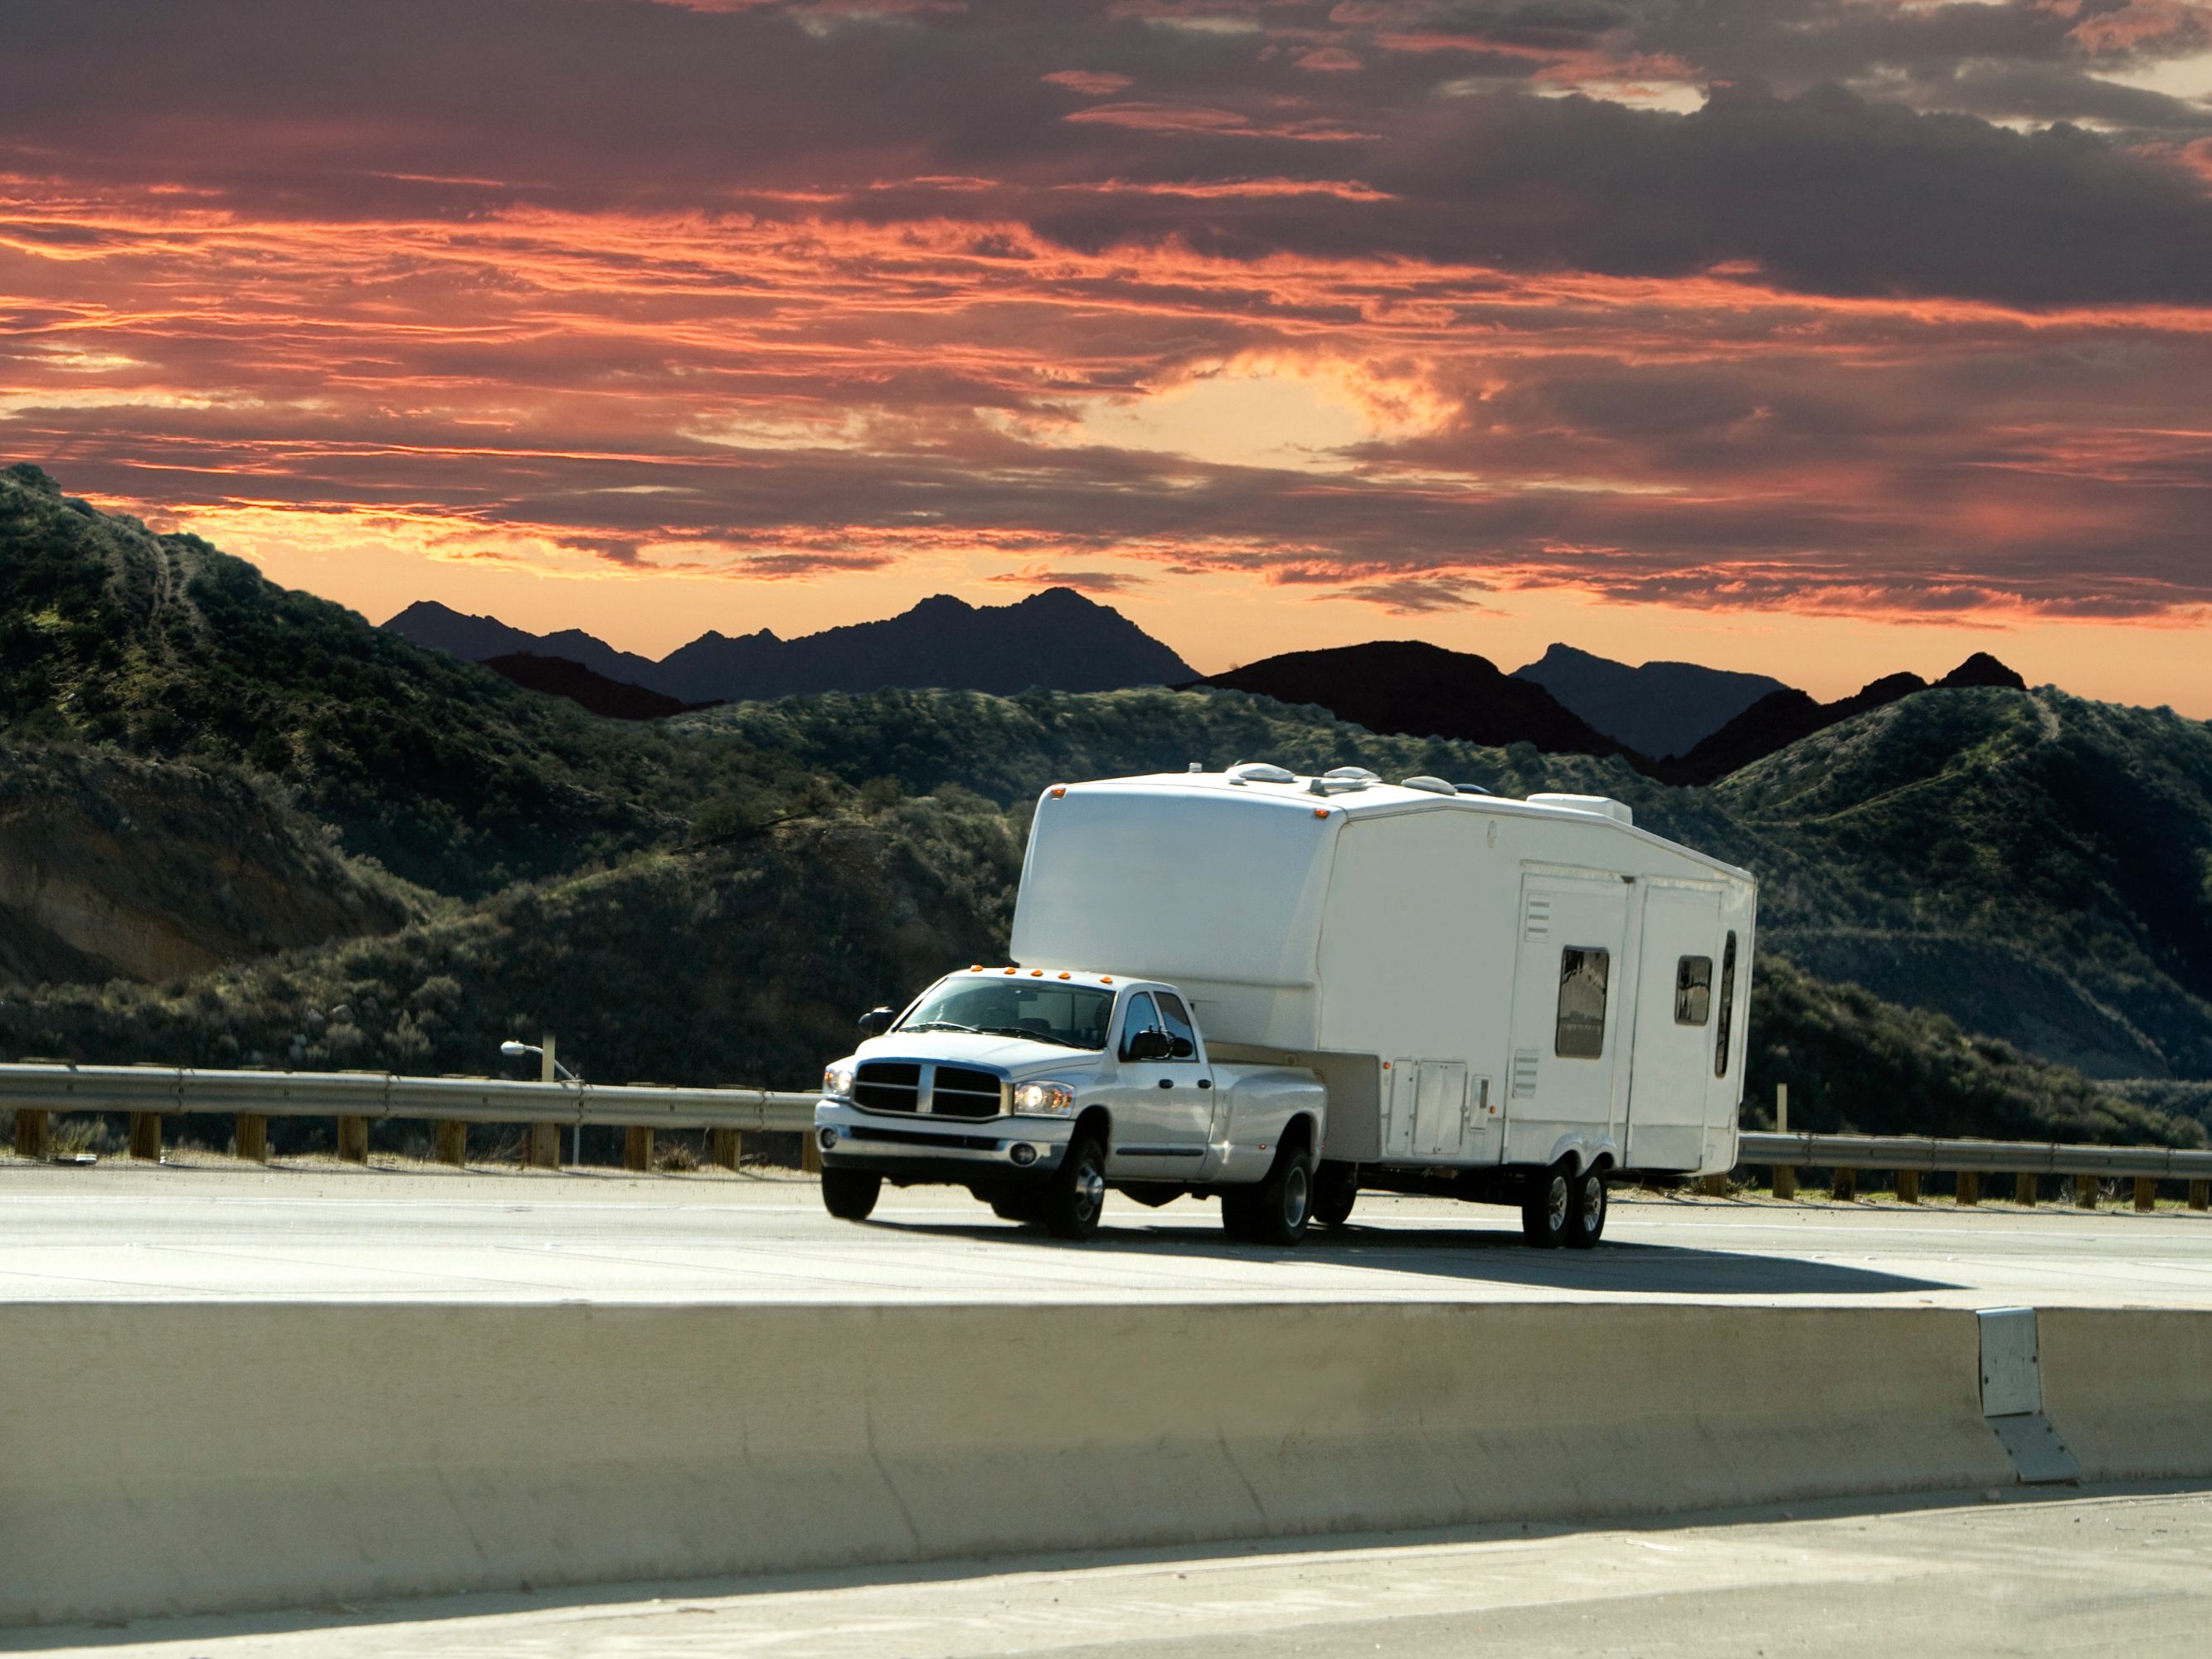 With motorhomes clearly established as the more affordable option, consider question No. 2 before you start looking into cost-effective trailers: Do you have a vehicle capable of towing it, or will you need to buy one? “If you already have a vehicle that will tow a travel trailer you can save on the upfront costs, as towable trailers are much less expensive than a motorhome,” Jon says.